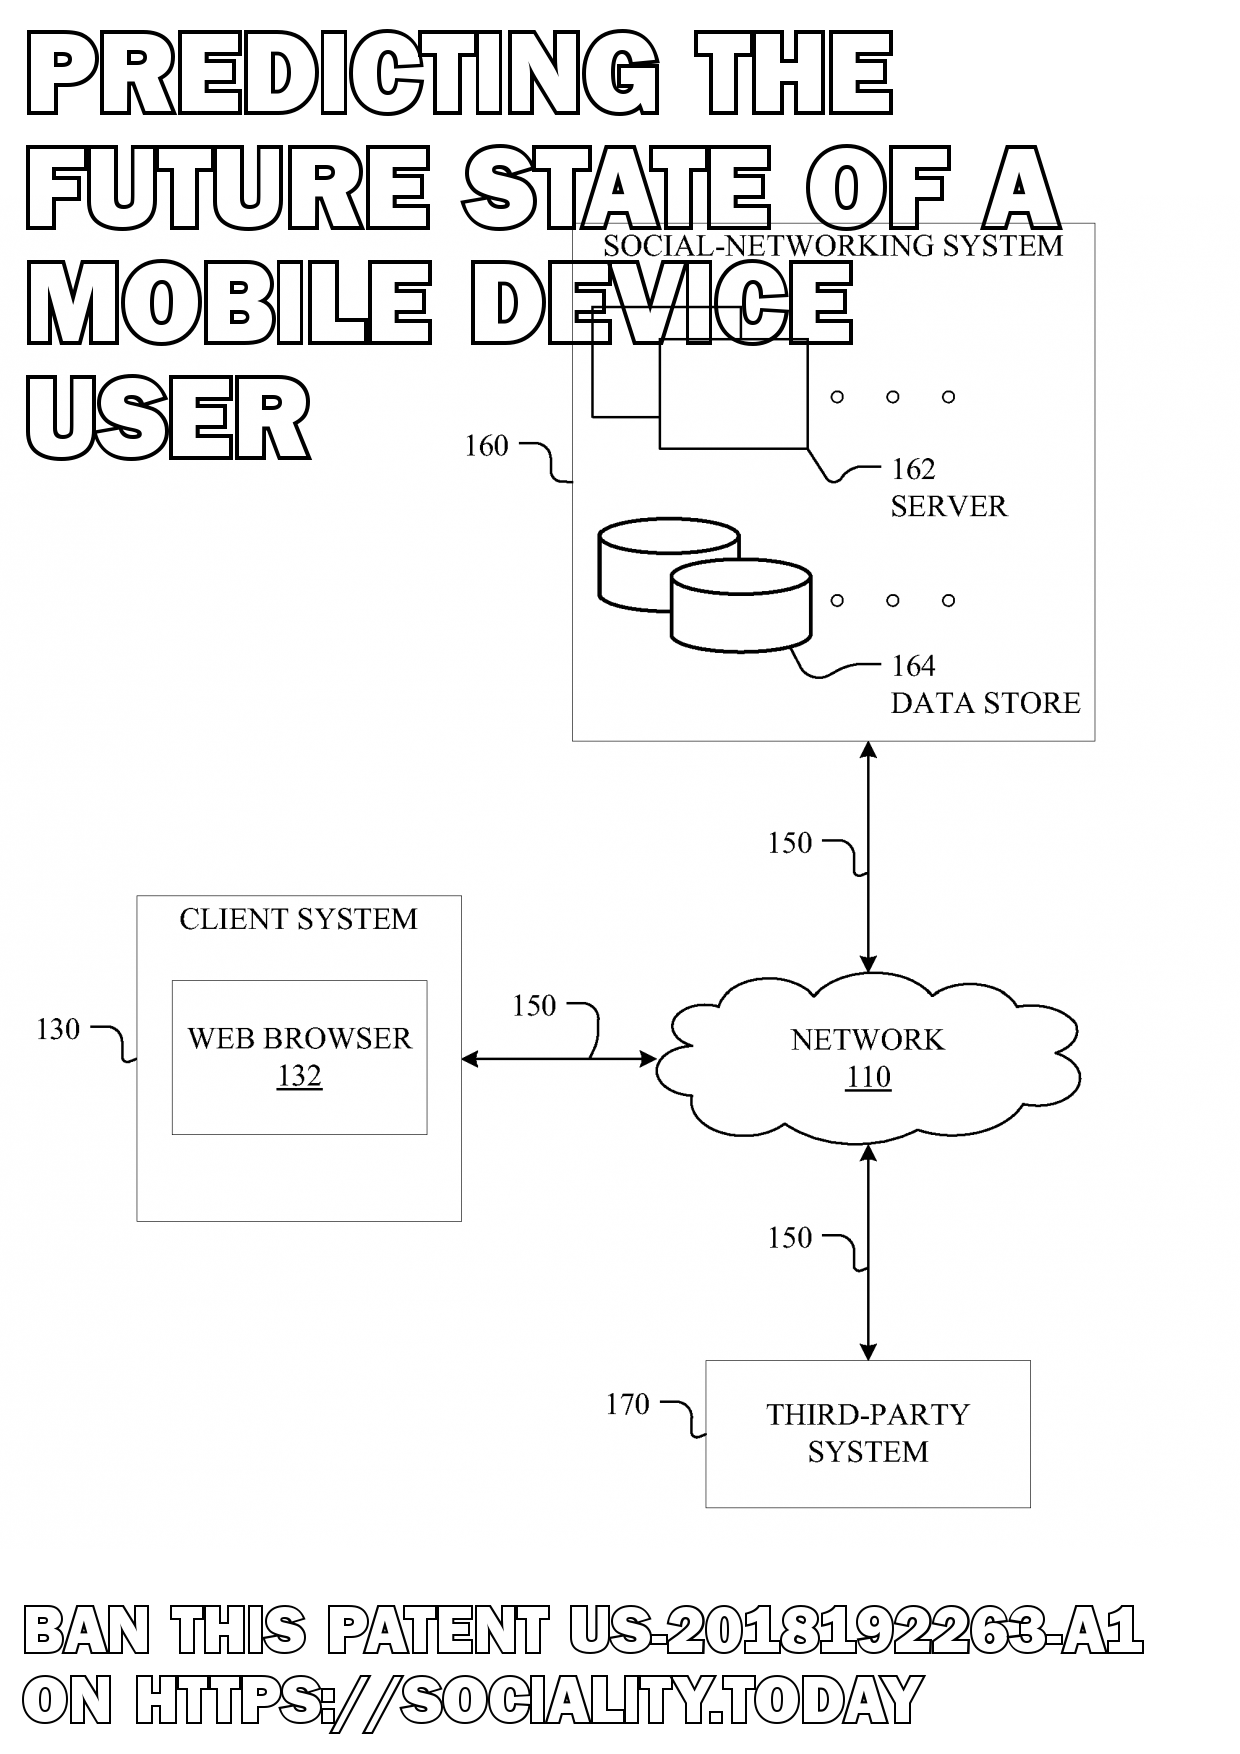 Predicting the future state of a mobile device user  - US-2018192263-A1